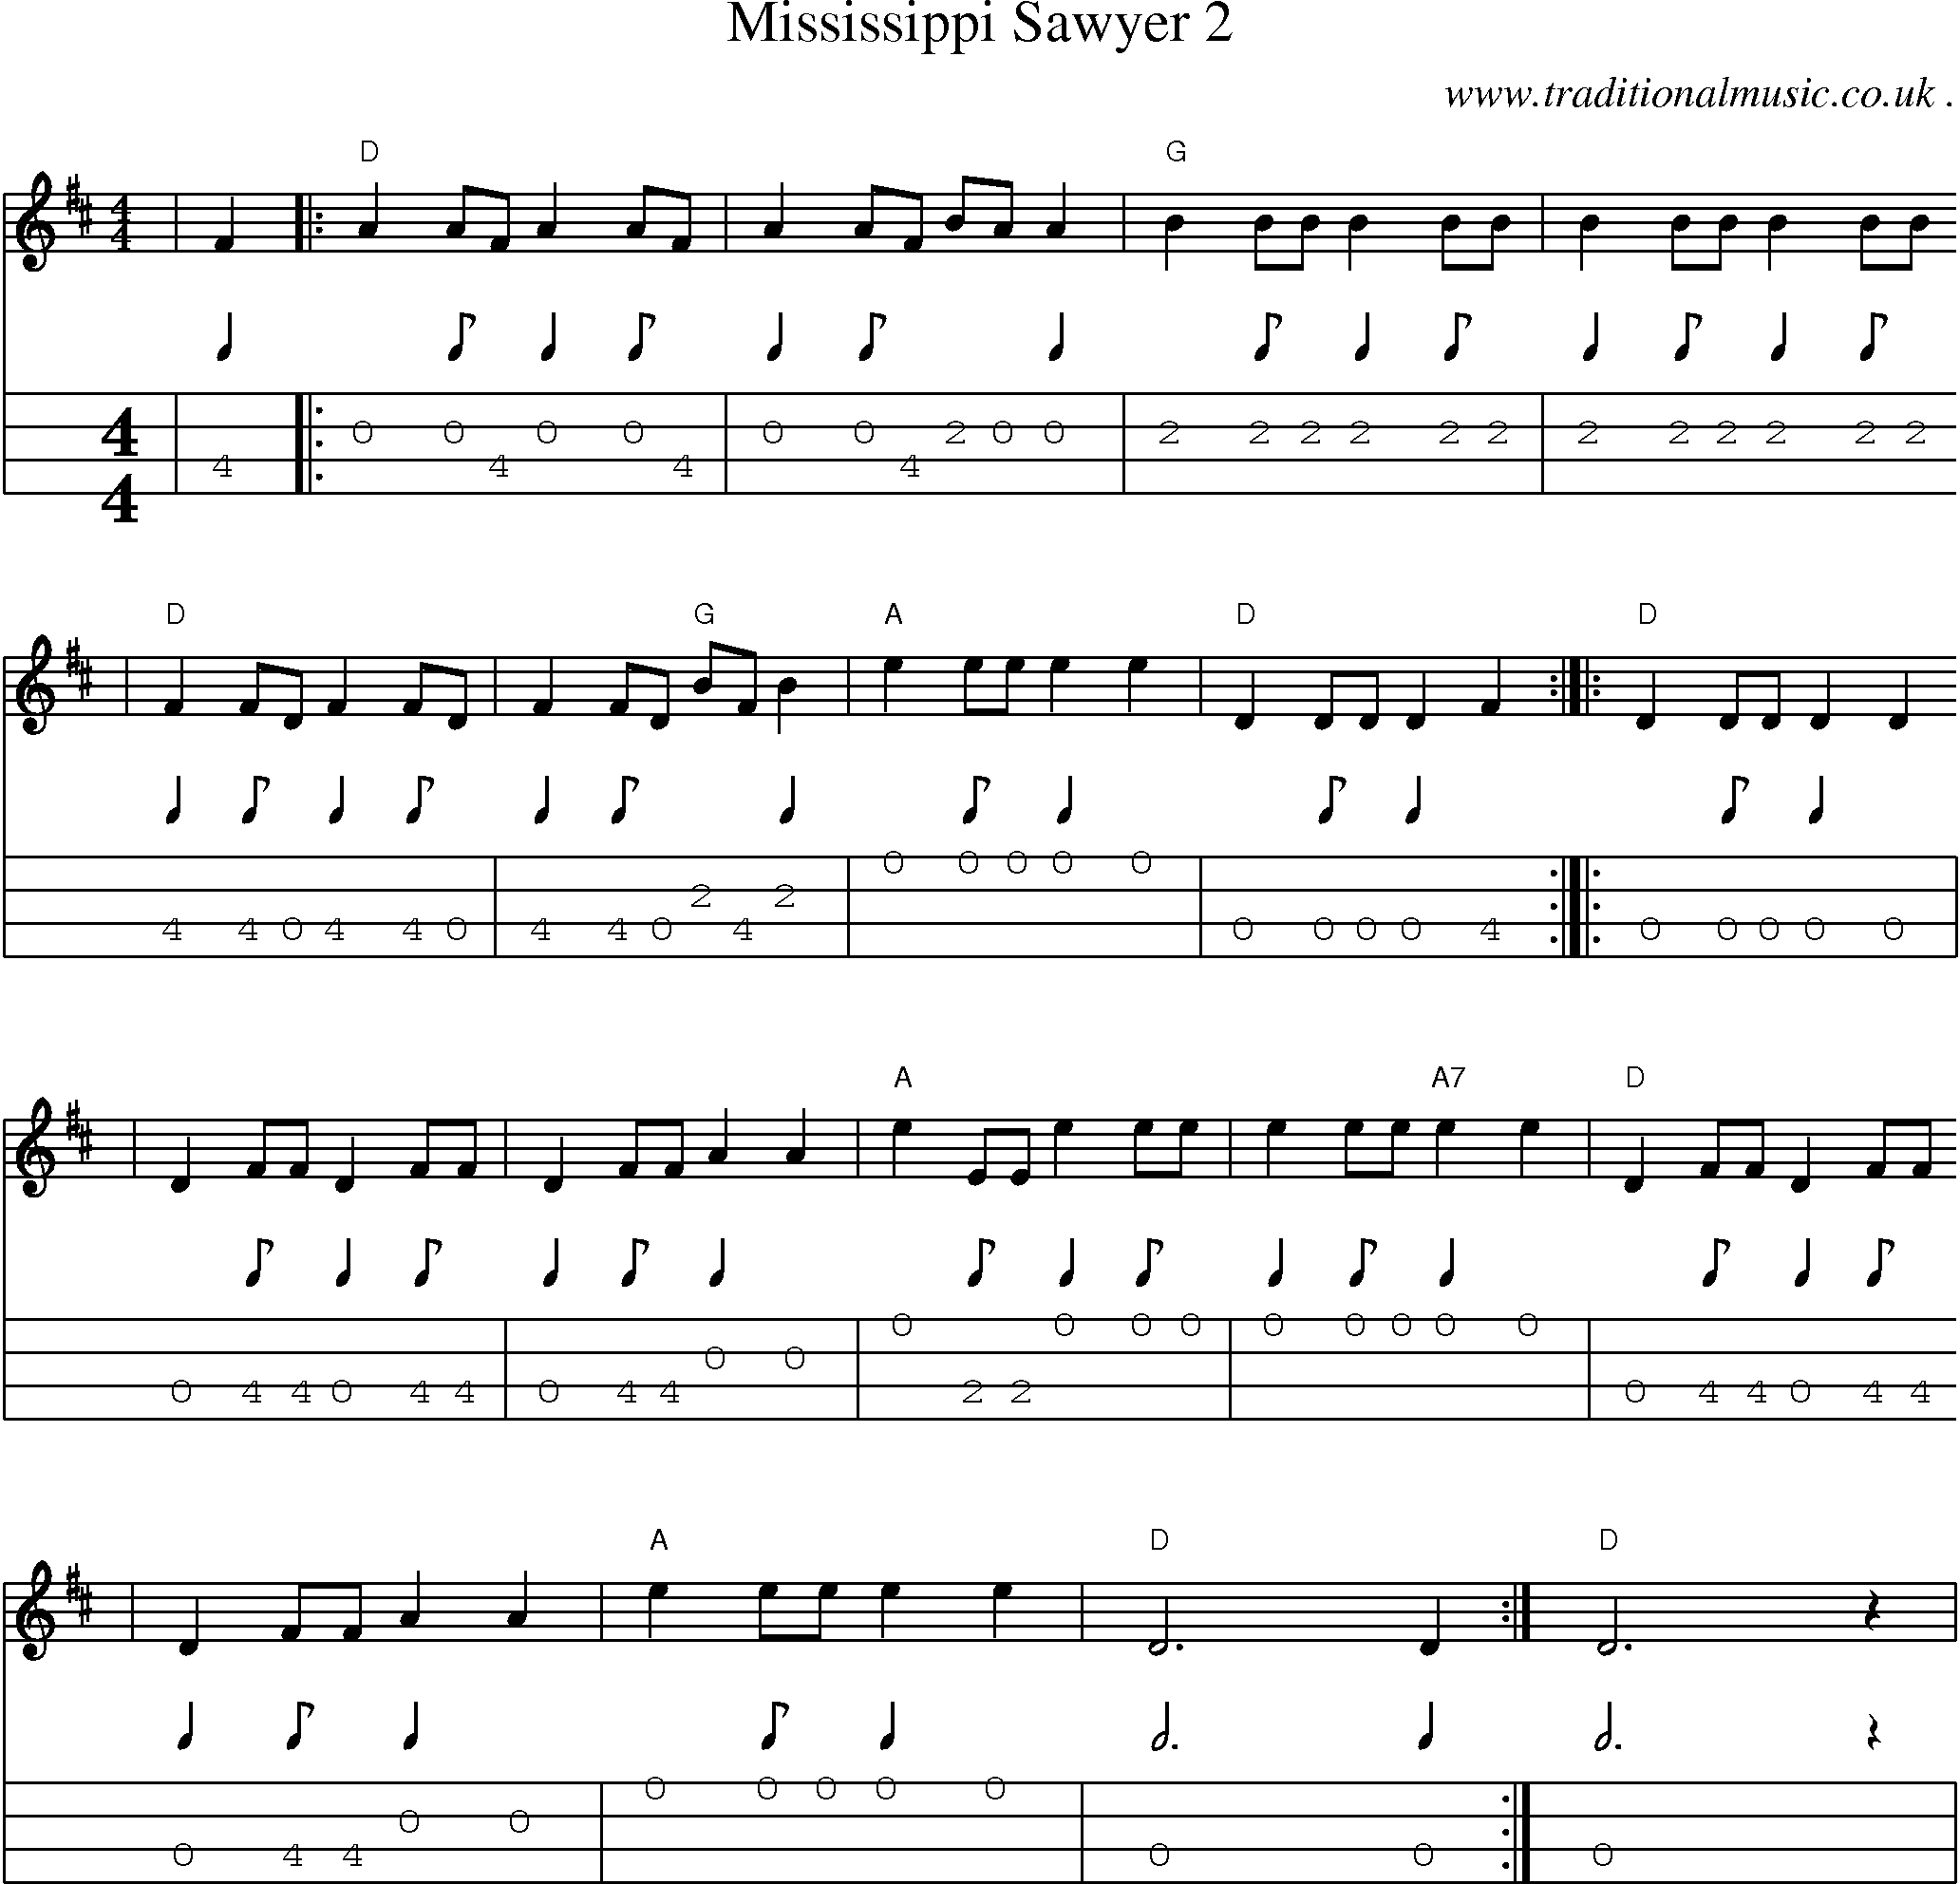 Music Score and Mandolin Tabs for Mississippi Sawyer 2